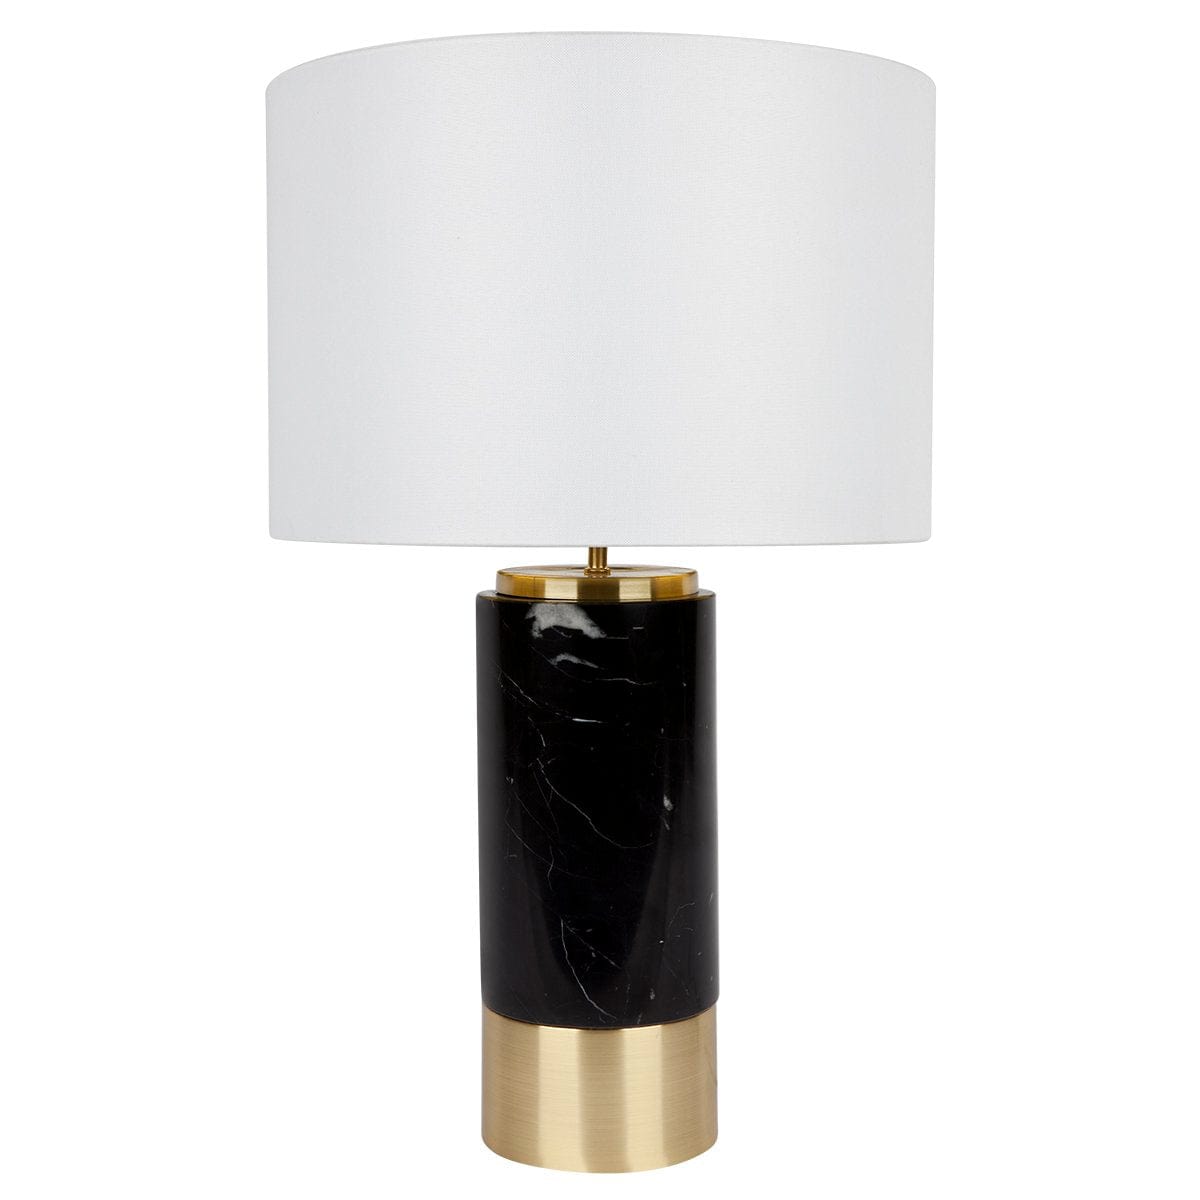 CAFE LIGHTING & LIVING Table Lamp Paola Marble Table Lamp - Black w White Shade B12272